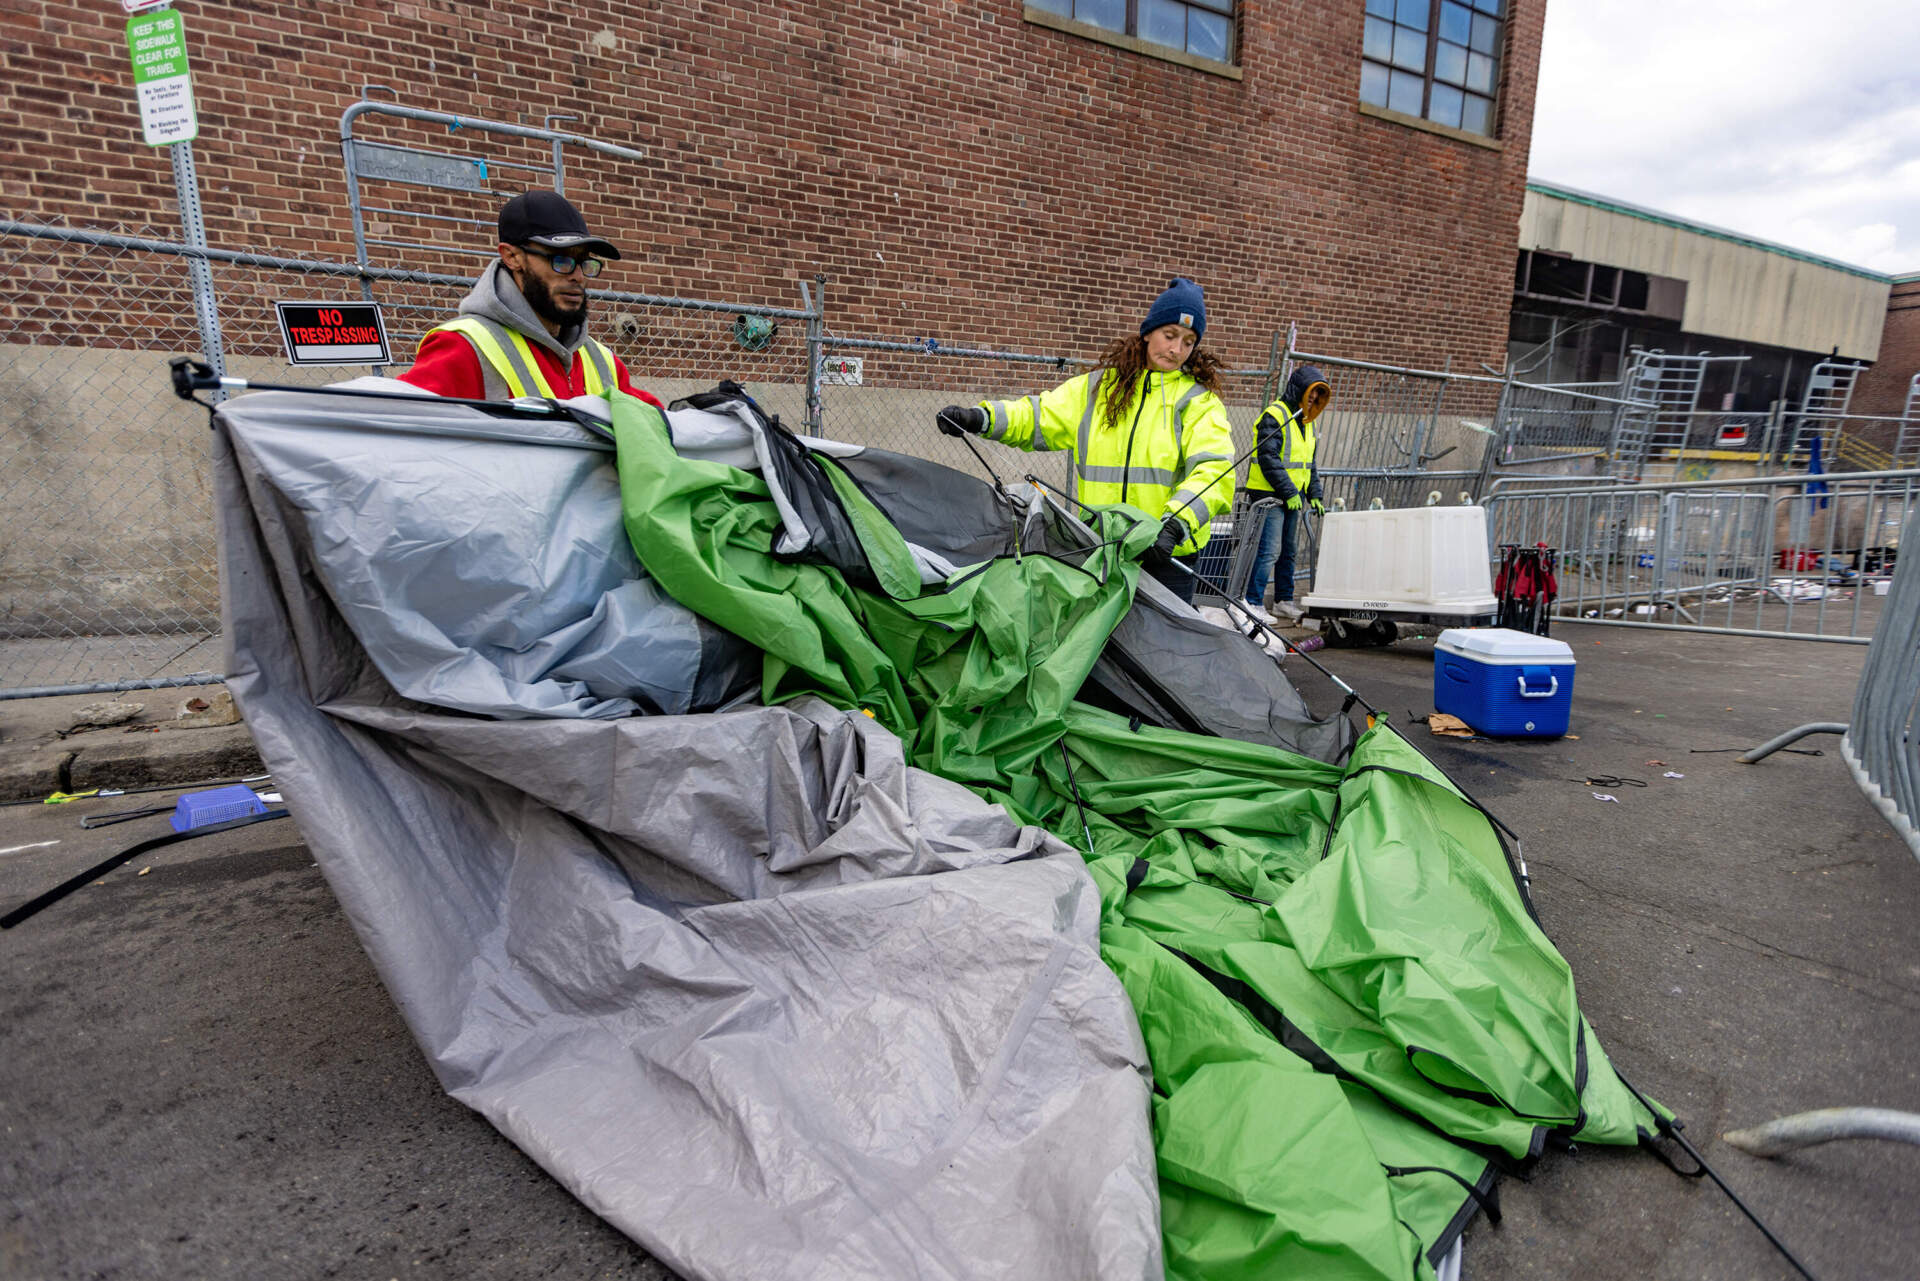 Volunteers from the Newmarket Business Improvement District remove a tent from Atkinson Street. (Jesse Costa/WBUR)